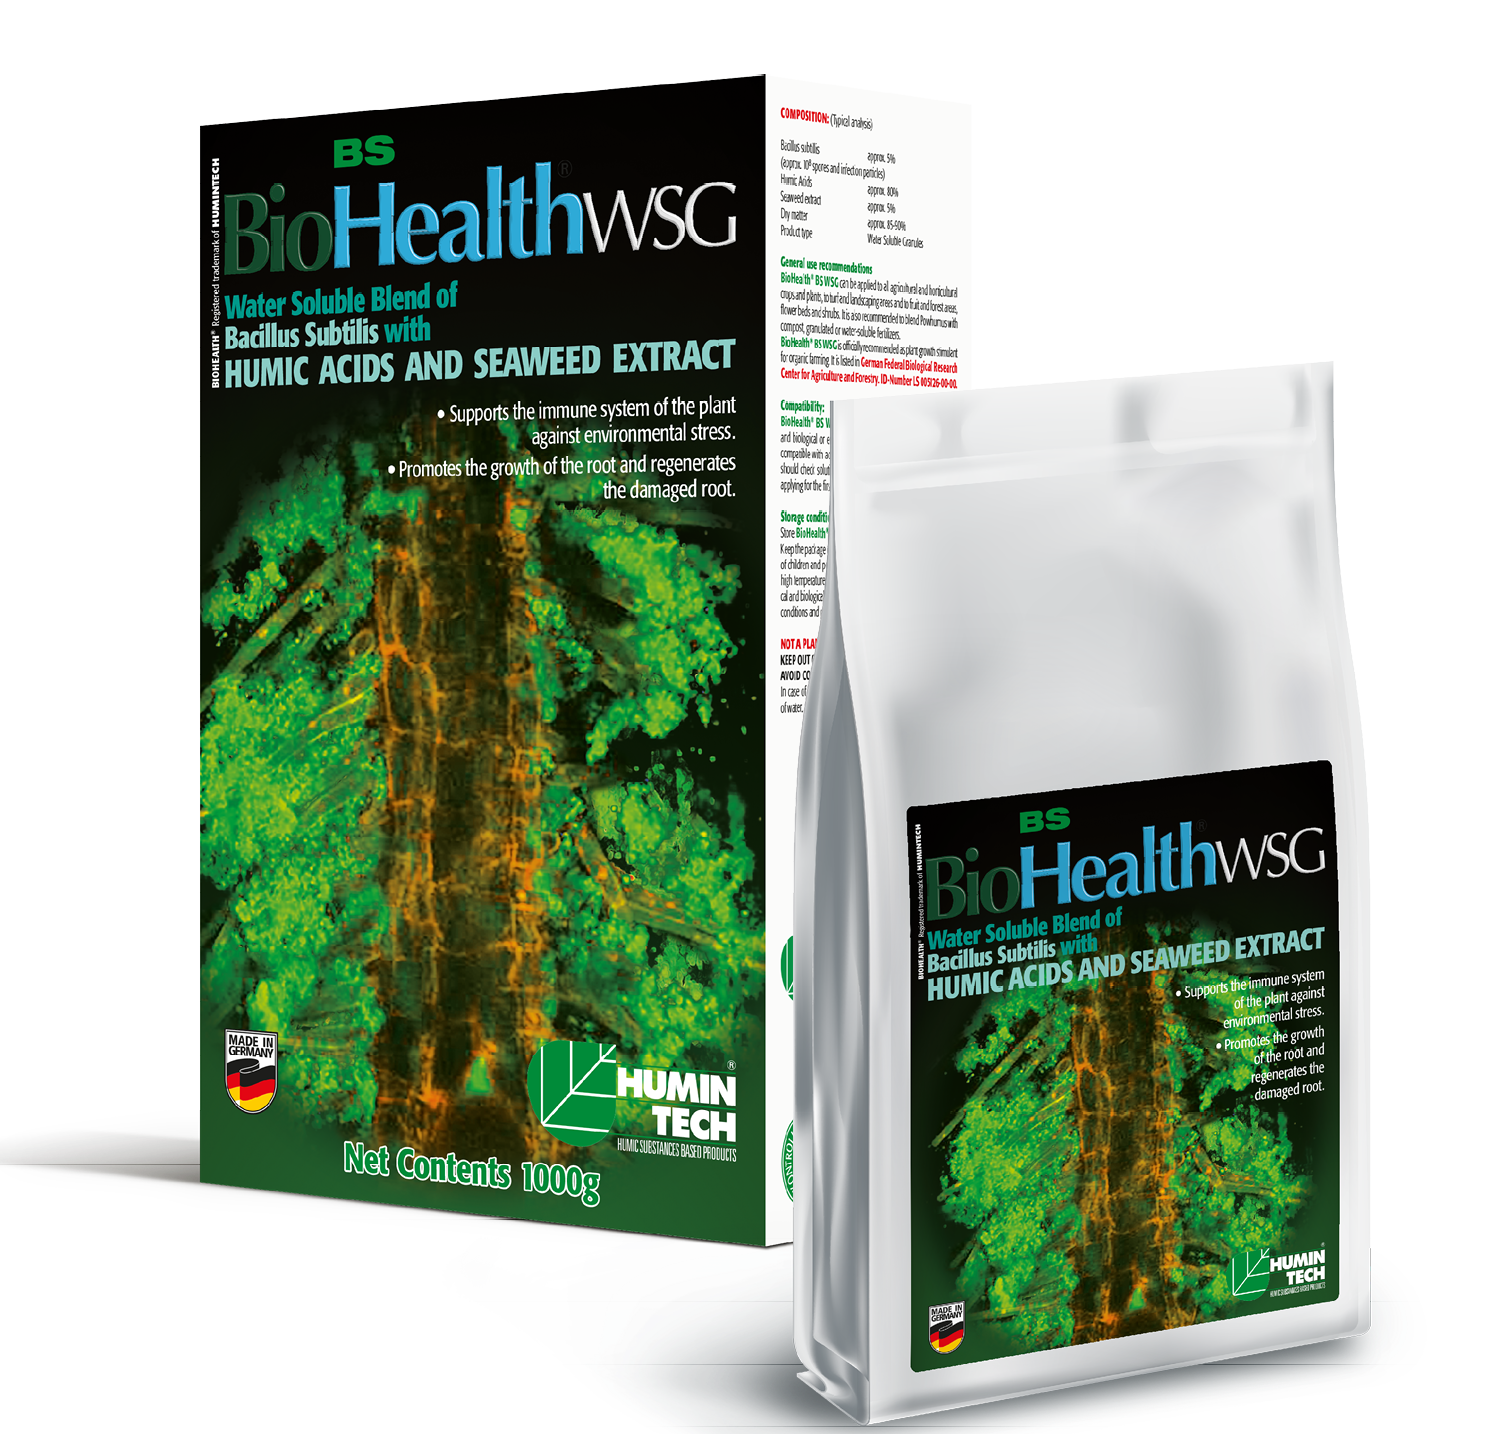 BioHealth BS WSG Water Soluble Blend of Bacillus Subtilis Seaweed Extract and Humic Acids